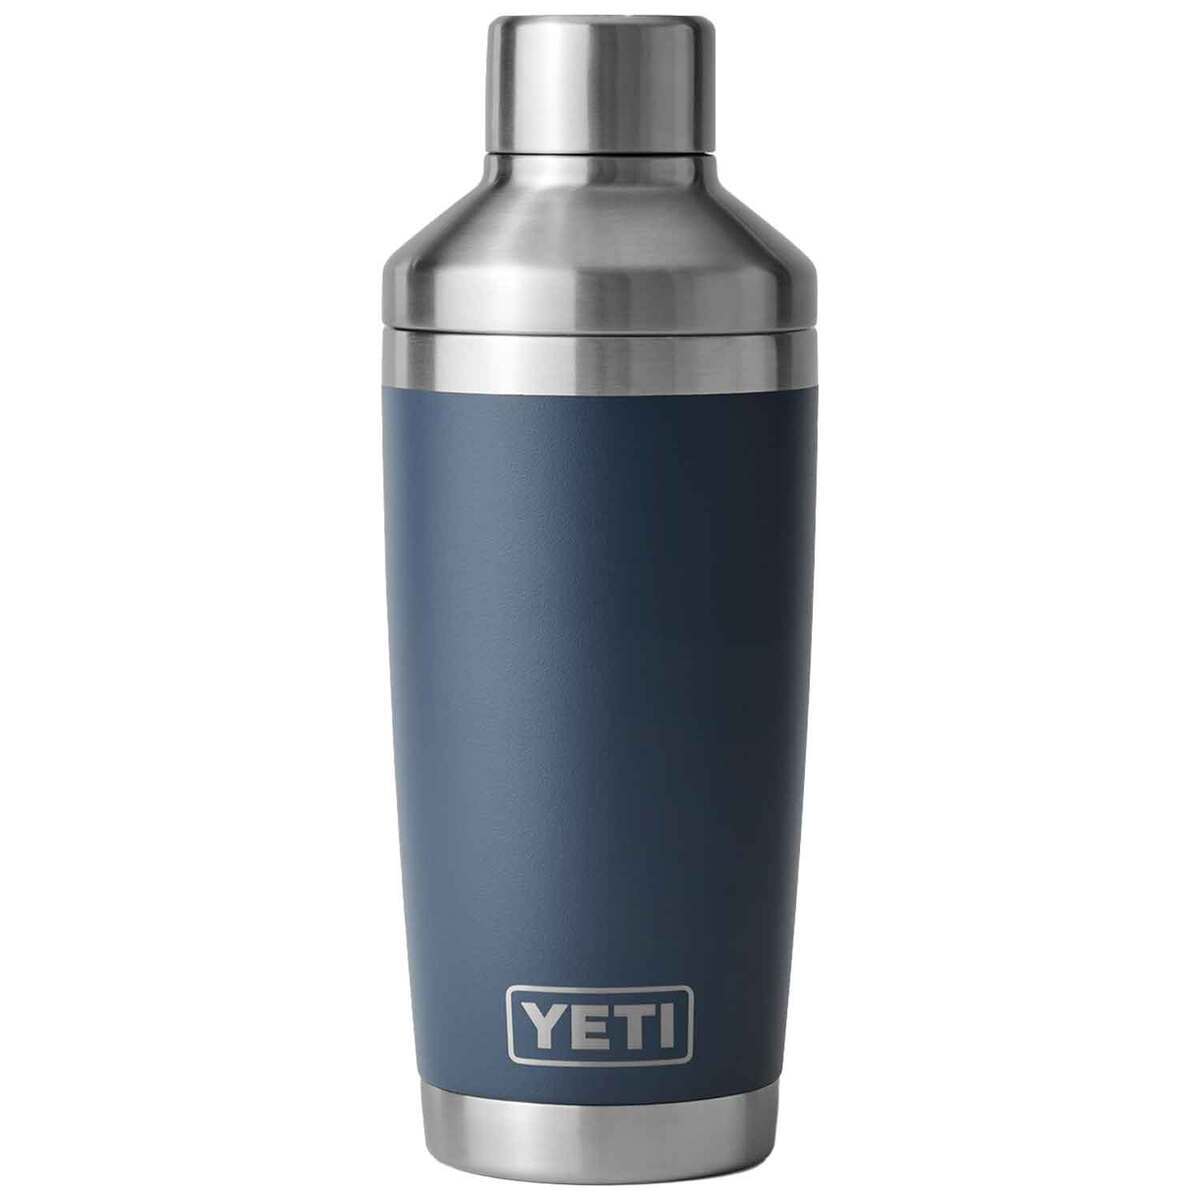 Buy Horizon Leak-Proof 20oz Cocktail Shaker, Insulated Stainless